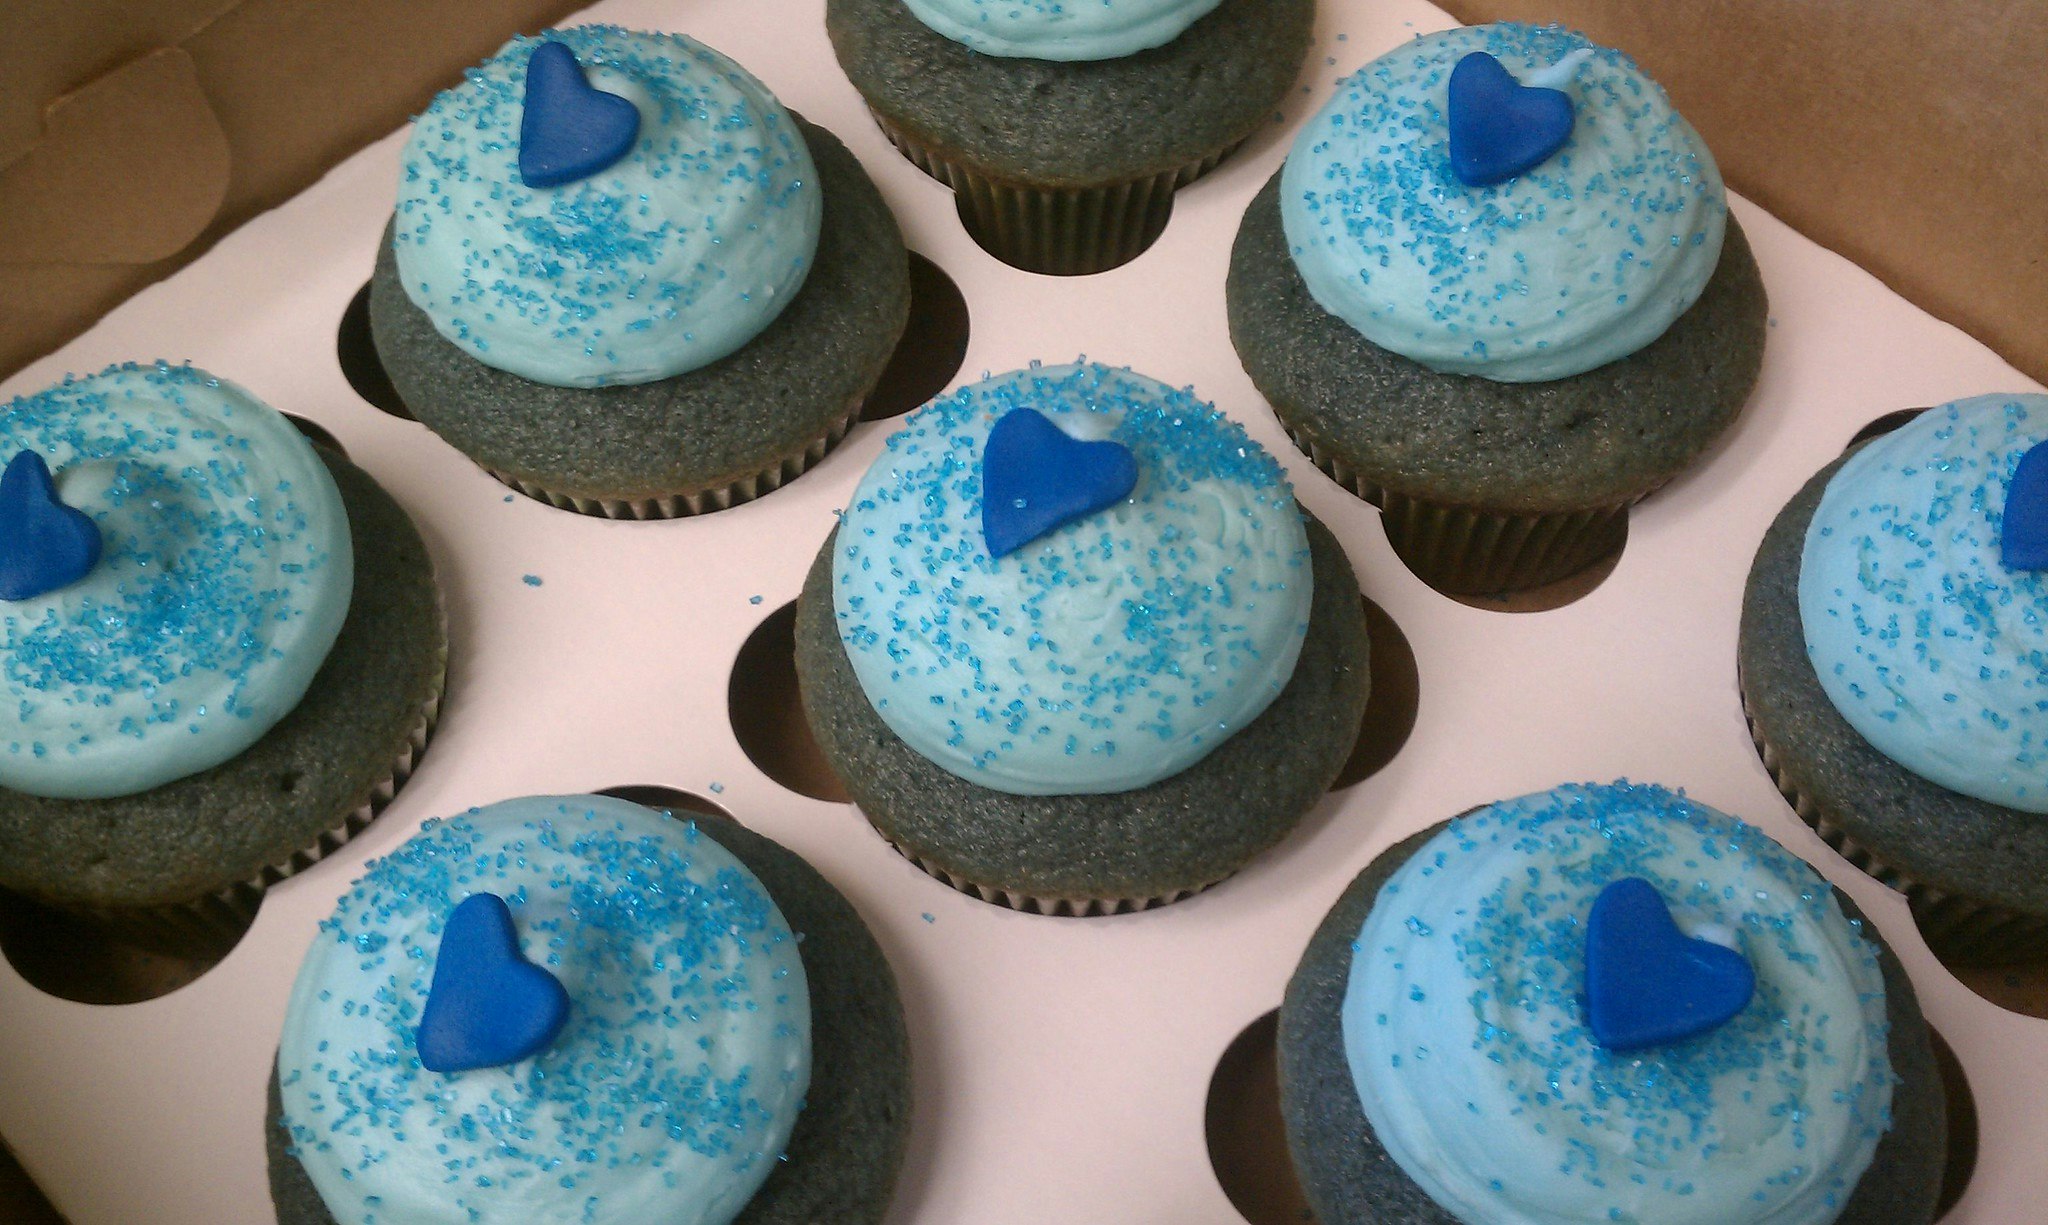 blue cupcakes with blue frosting and heart decoration